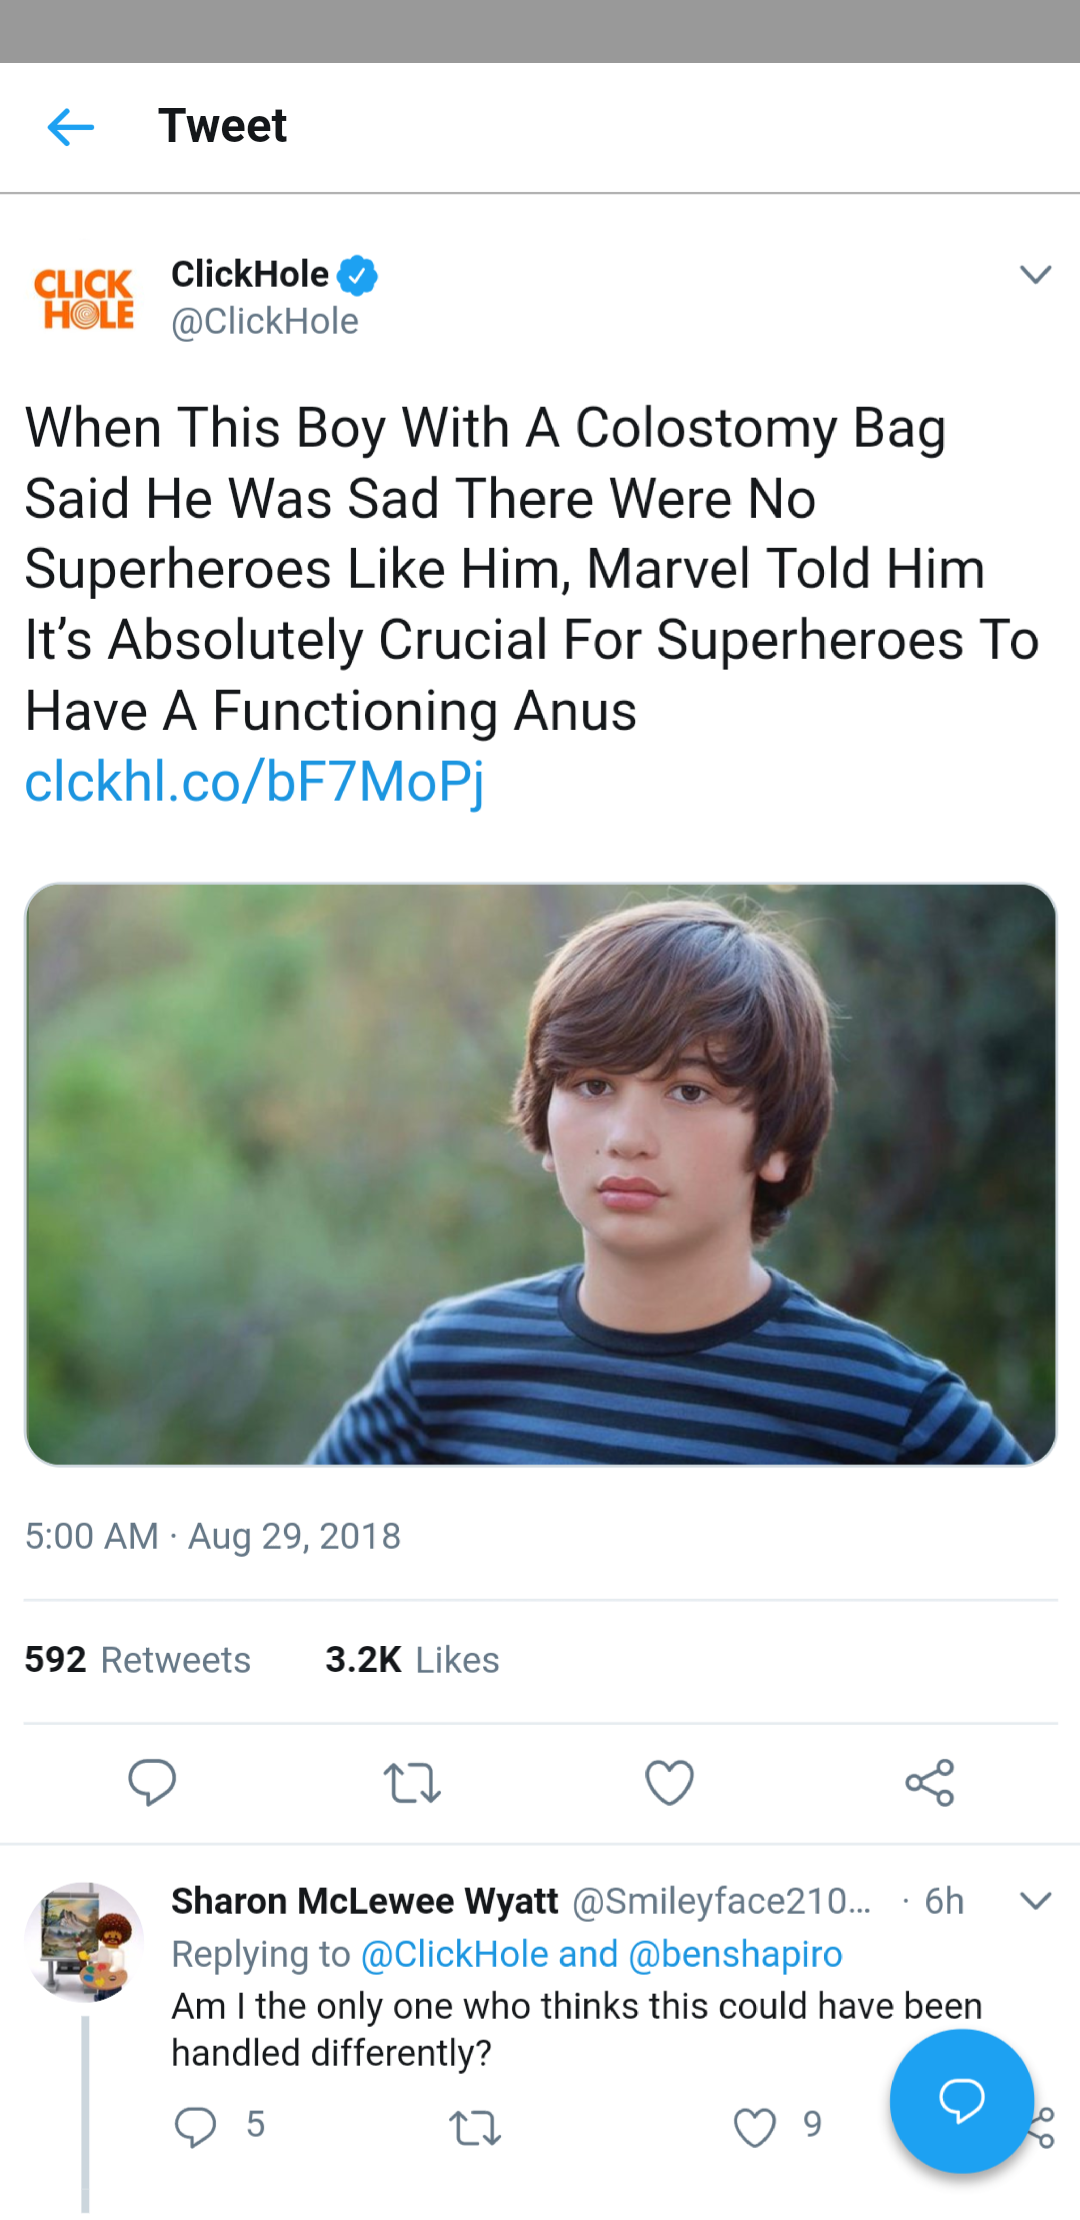 dankness of click hole - Tweet Click Click Hole Hole Click Hole When This Boy With A Colostomy Bag Said He Was Sad There Were No Superheroes Him, Marvel Told Him It's Absolutely Crucial For Superheroes To Have A Functioning Anus clckhl.cobF7MoPj 5.00 Am 5